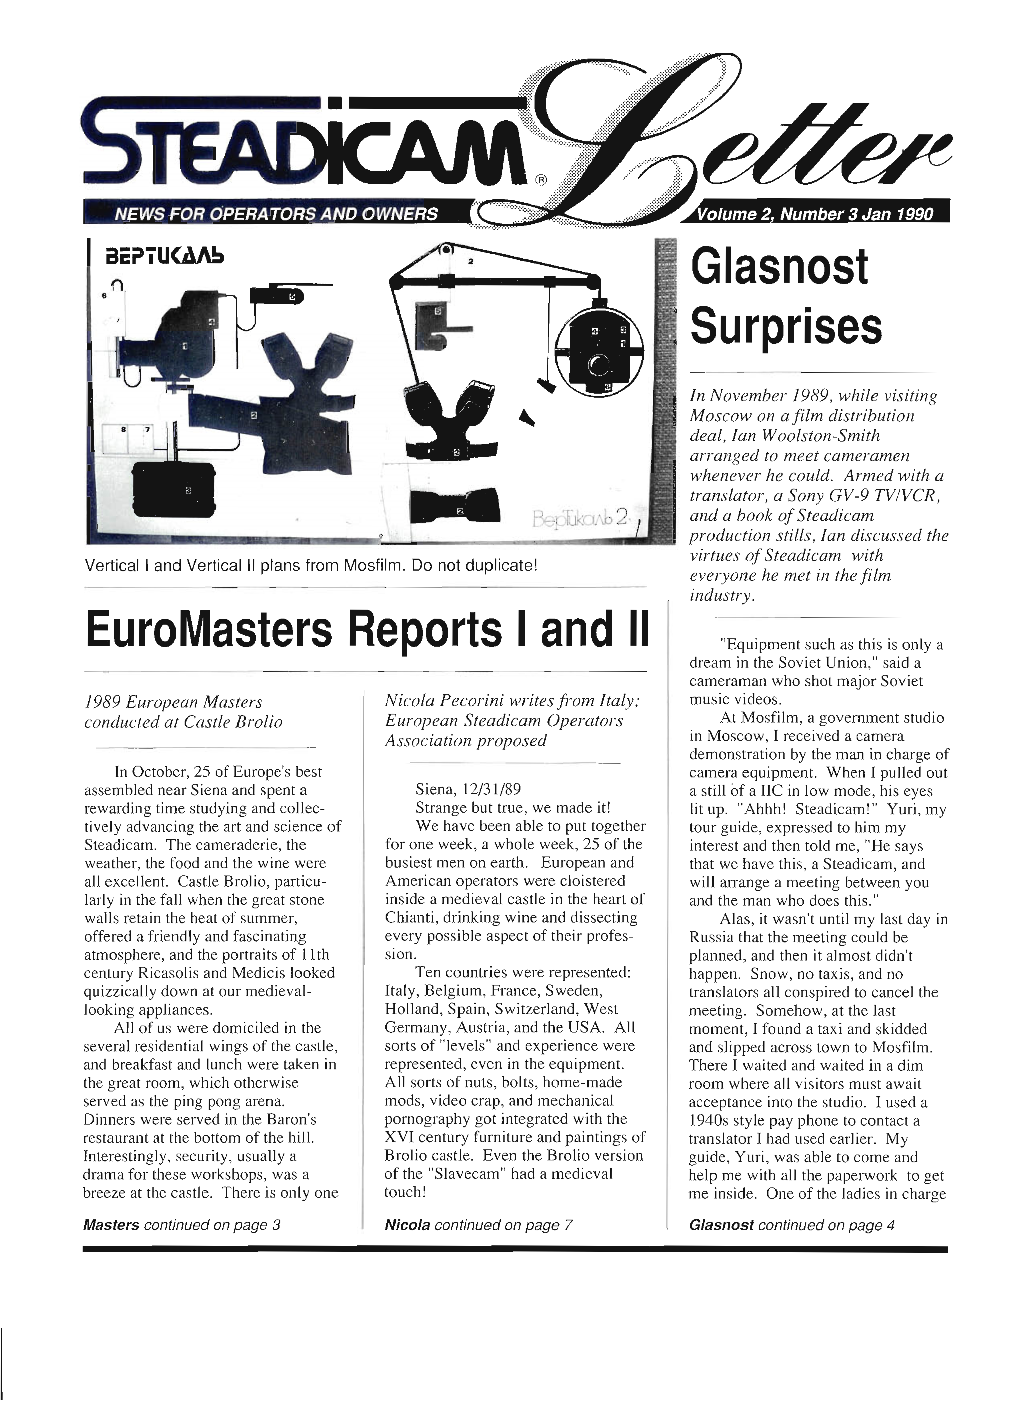 Euromasters Reports I and II Glasnost Surprises